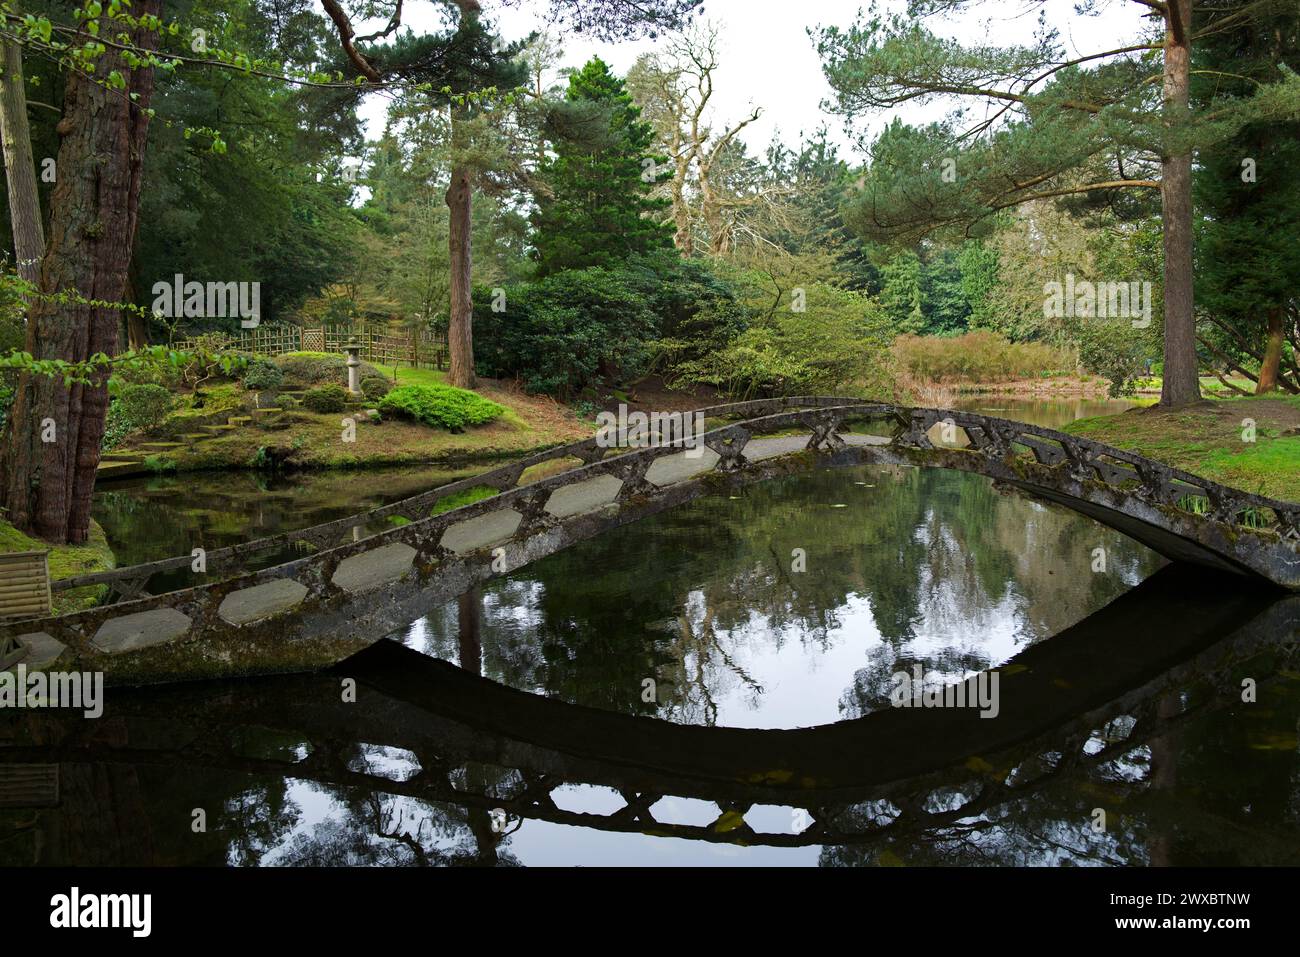 The Japanese Garden at Tatton Park, England, is based on the style of a Japanese tea garden. Some of the garden artefacts were brought from Japan. Stock Photo